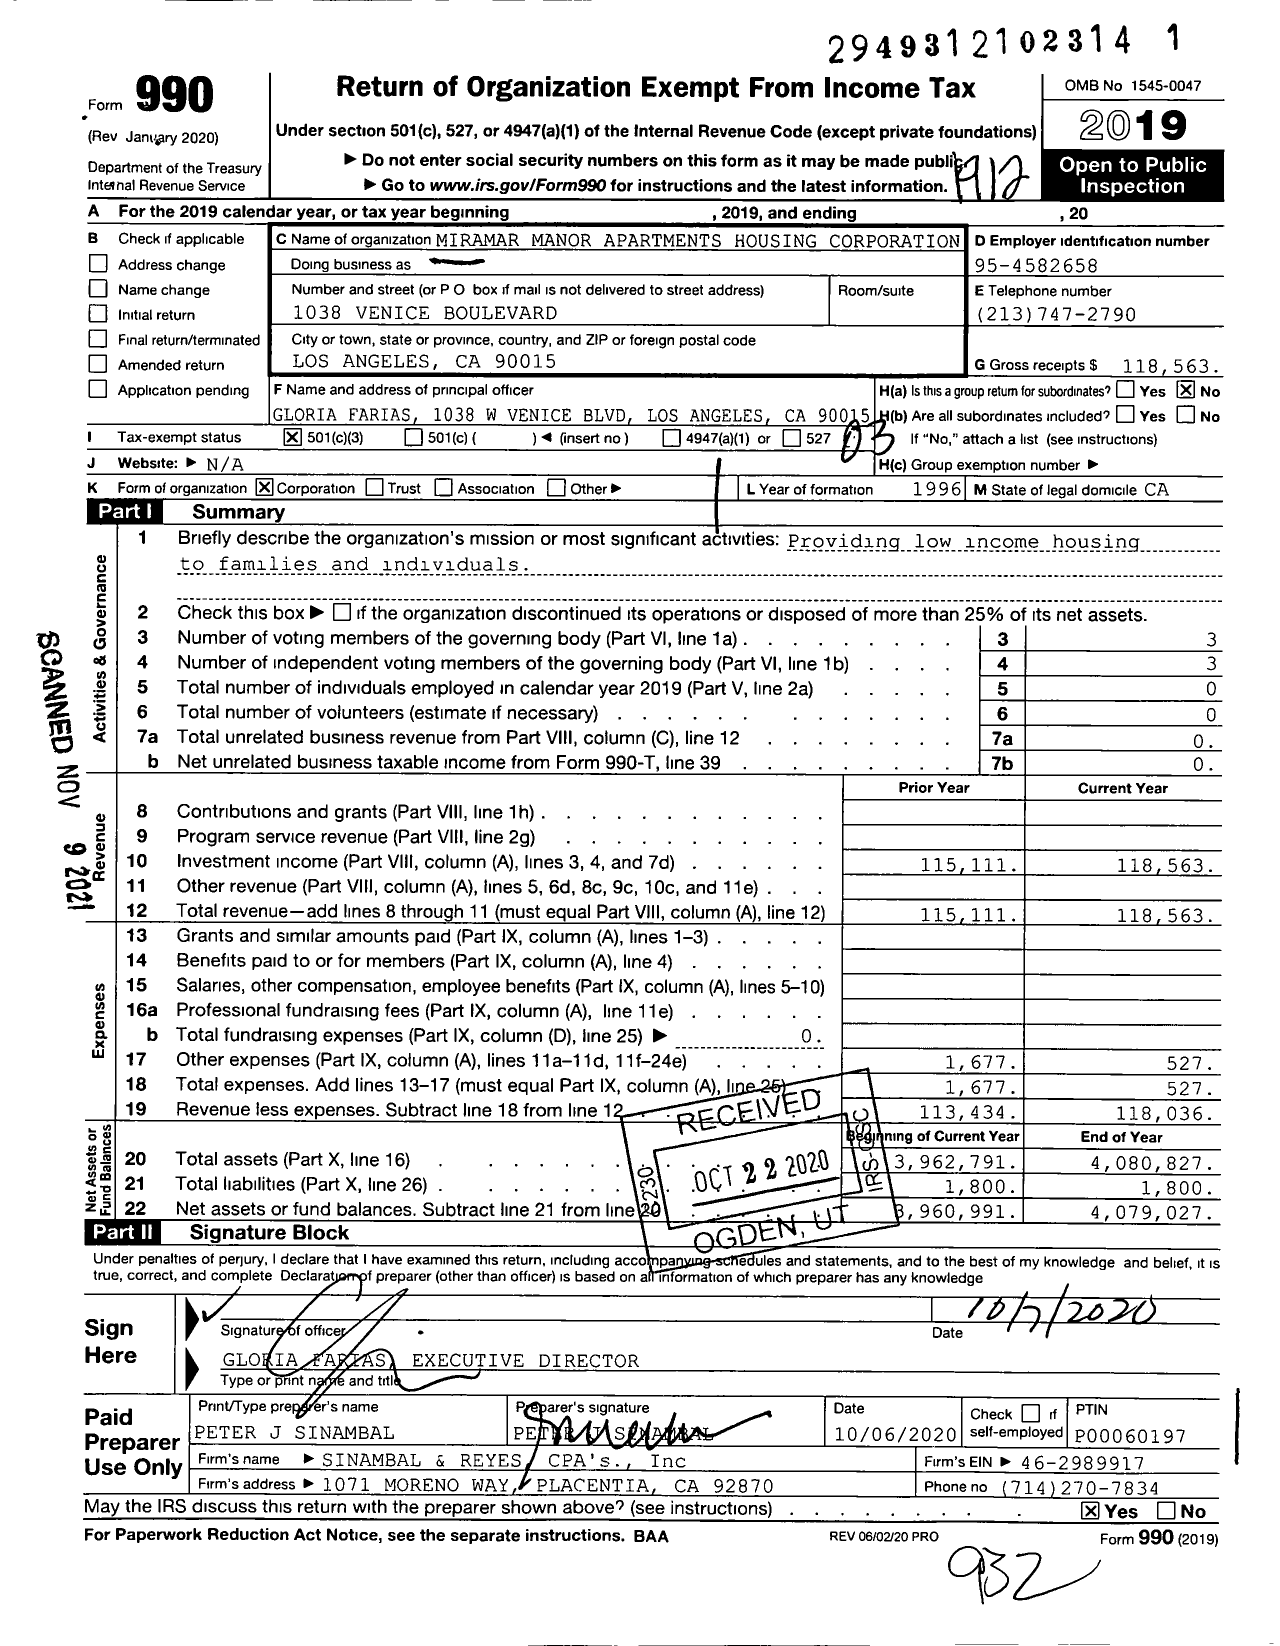 Image of first page of 2019 Form 990 for Miramar Manor Apartments Housing Corporation